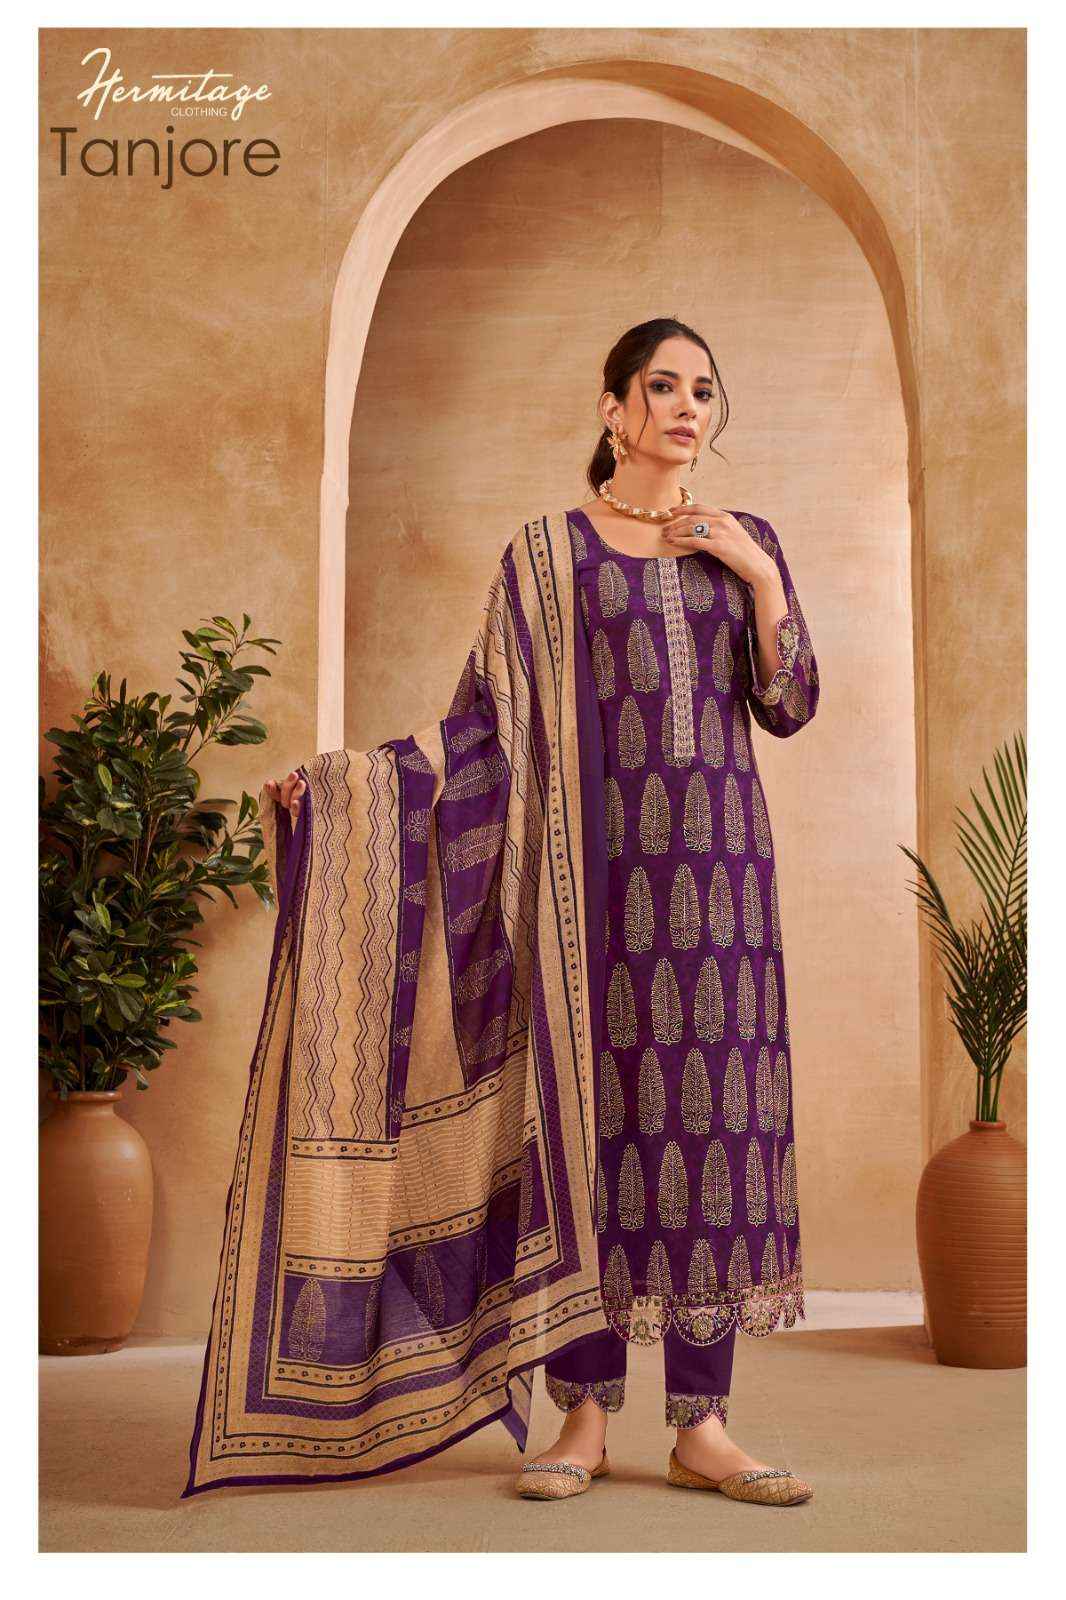 HERMITAGE CLOTHING TANJORE COTTON FANCY WORK SUITS